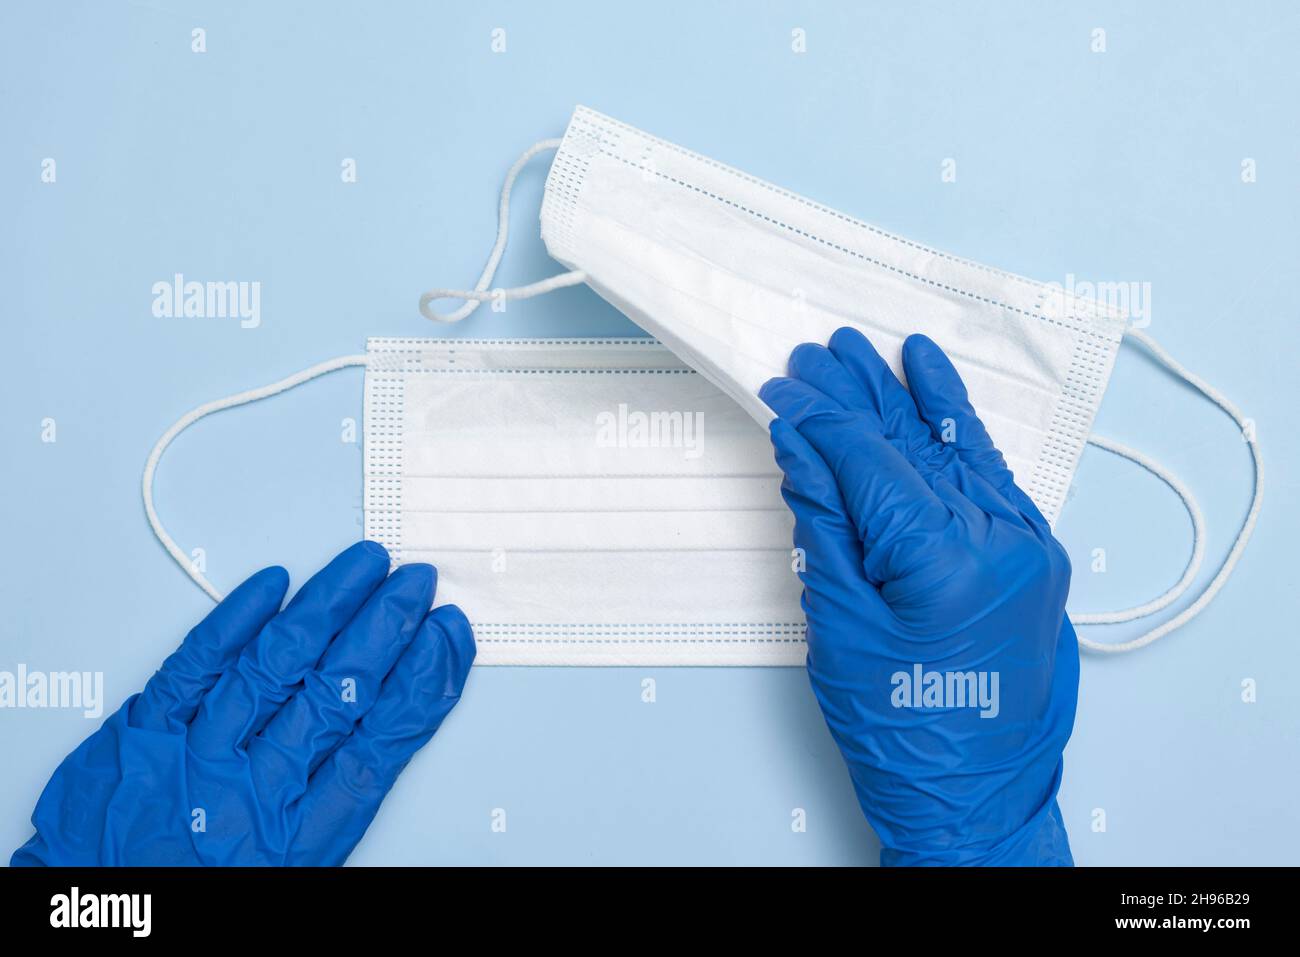 Hand in medical gloves holds two white medical face masks on blue background Stock Photo